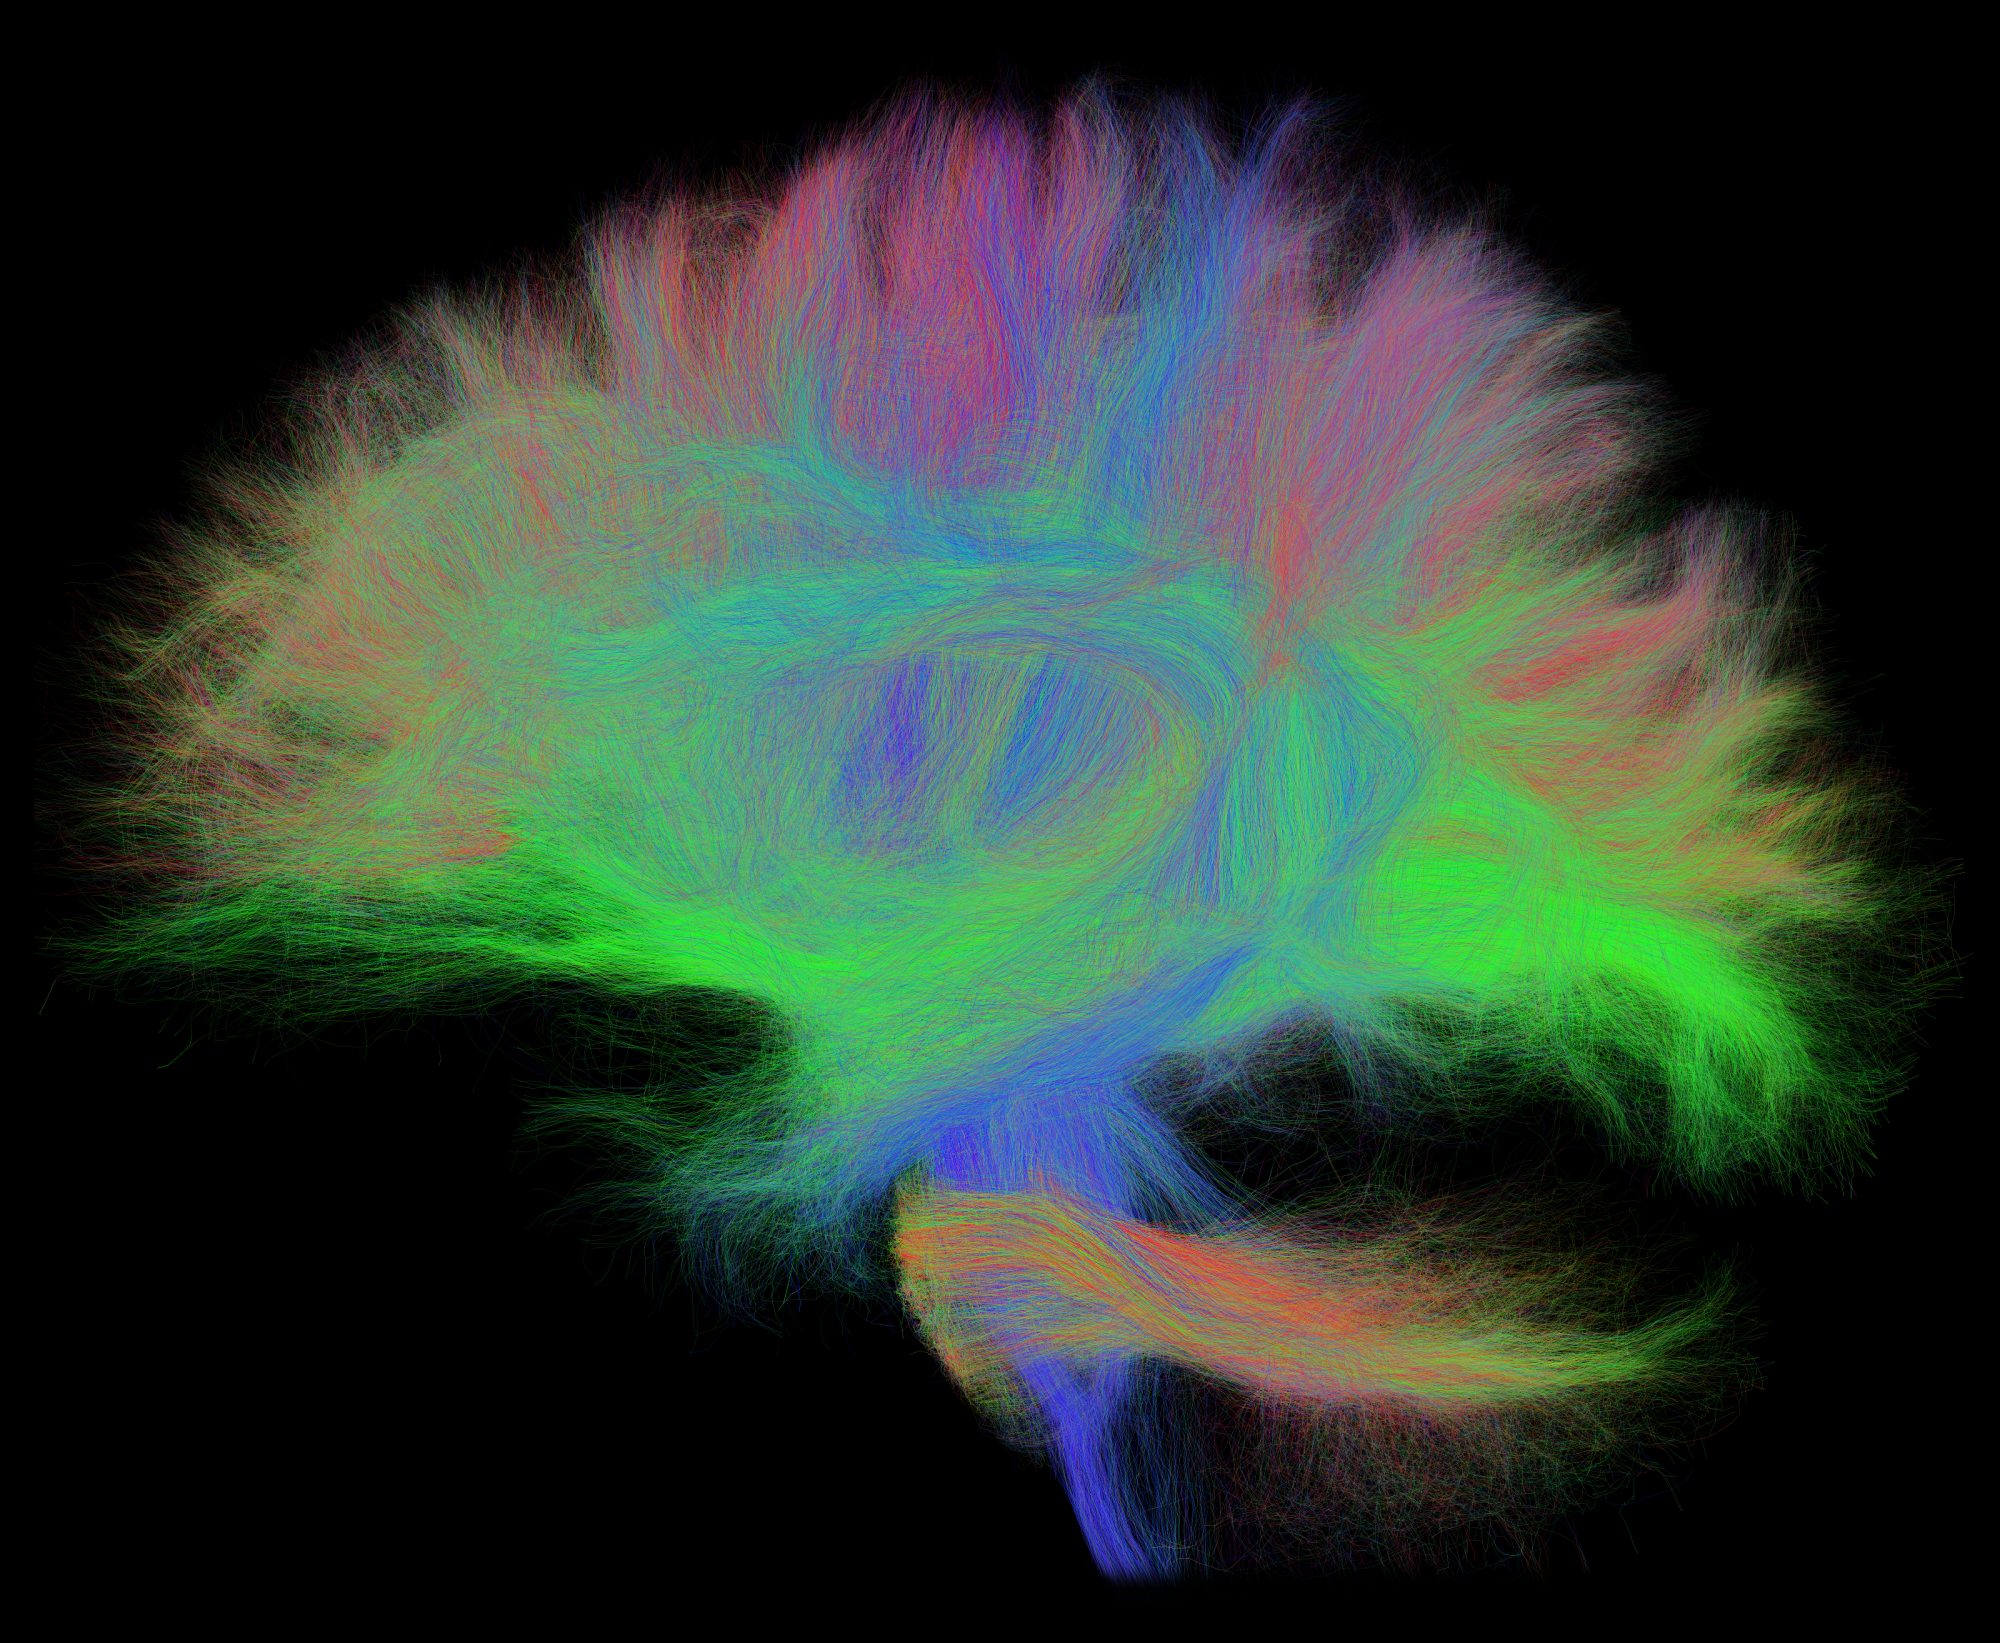 brain image with white matter